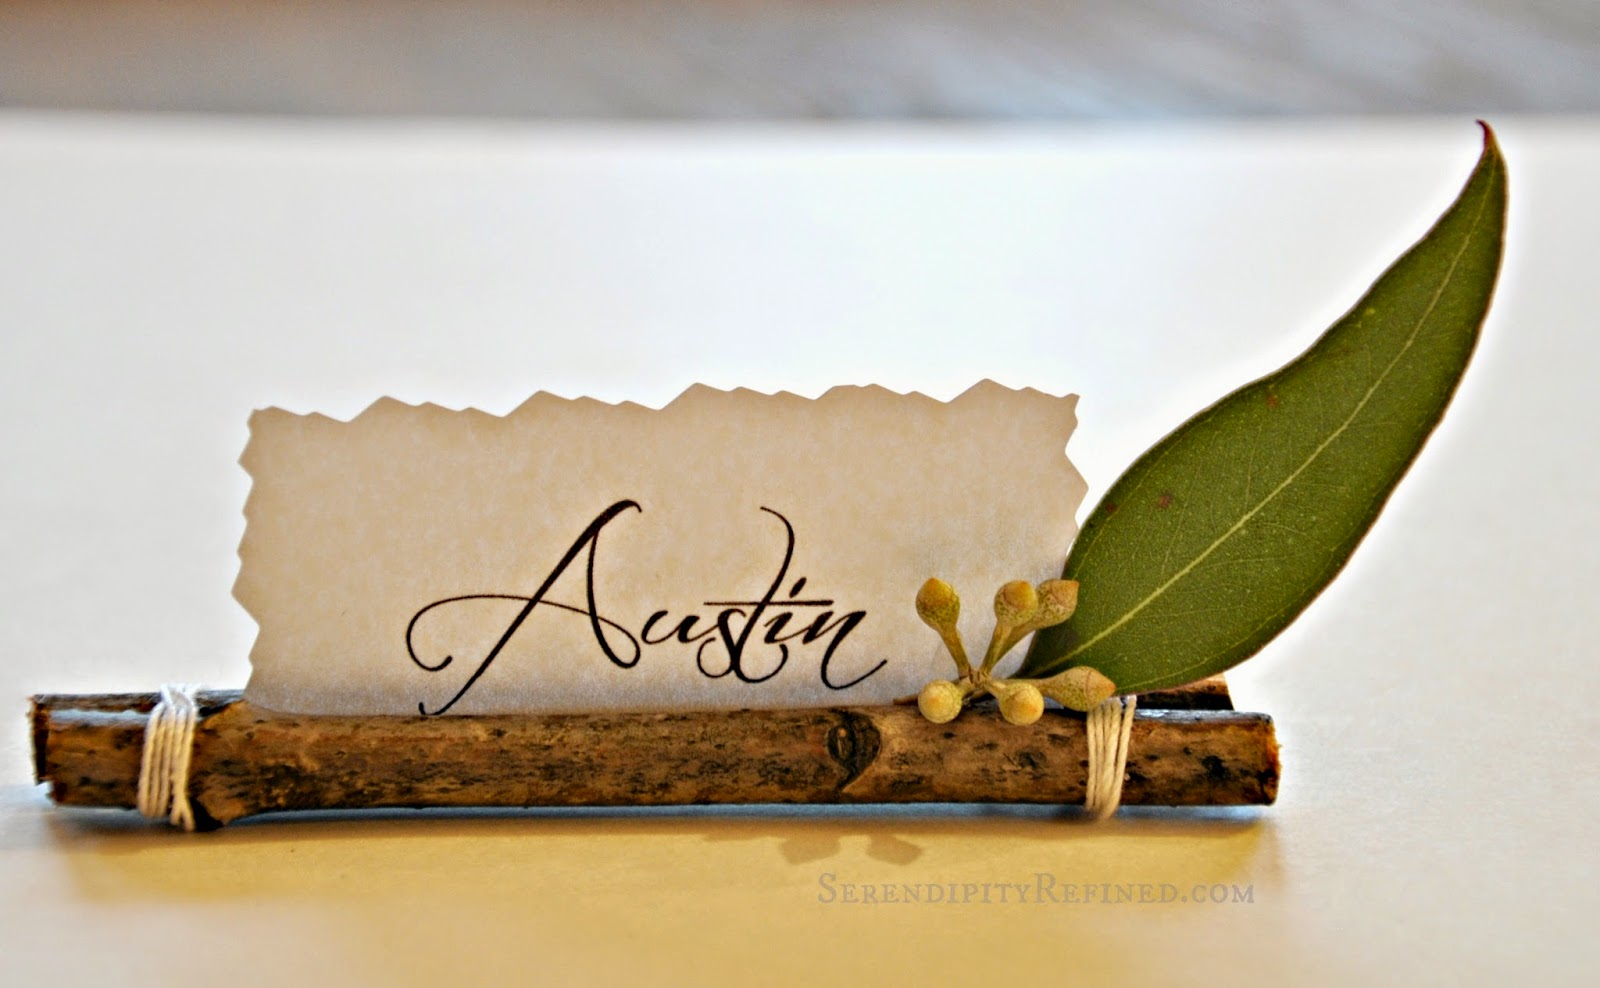 Serendipity Refined Blog: Super Easy Twig Place Card Holders